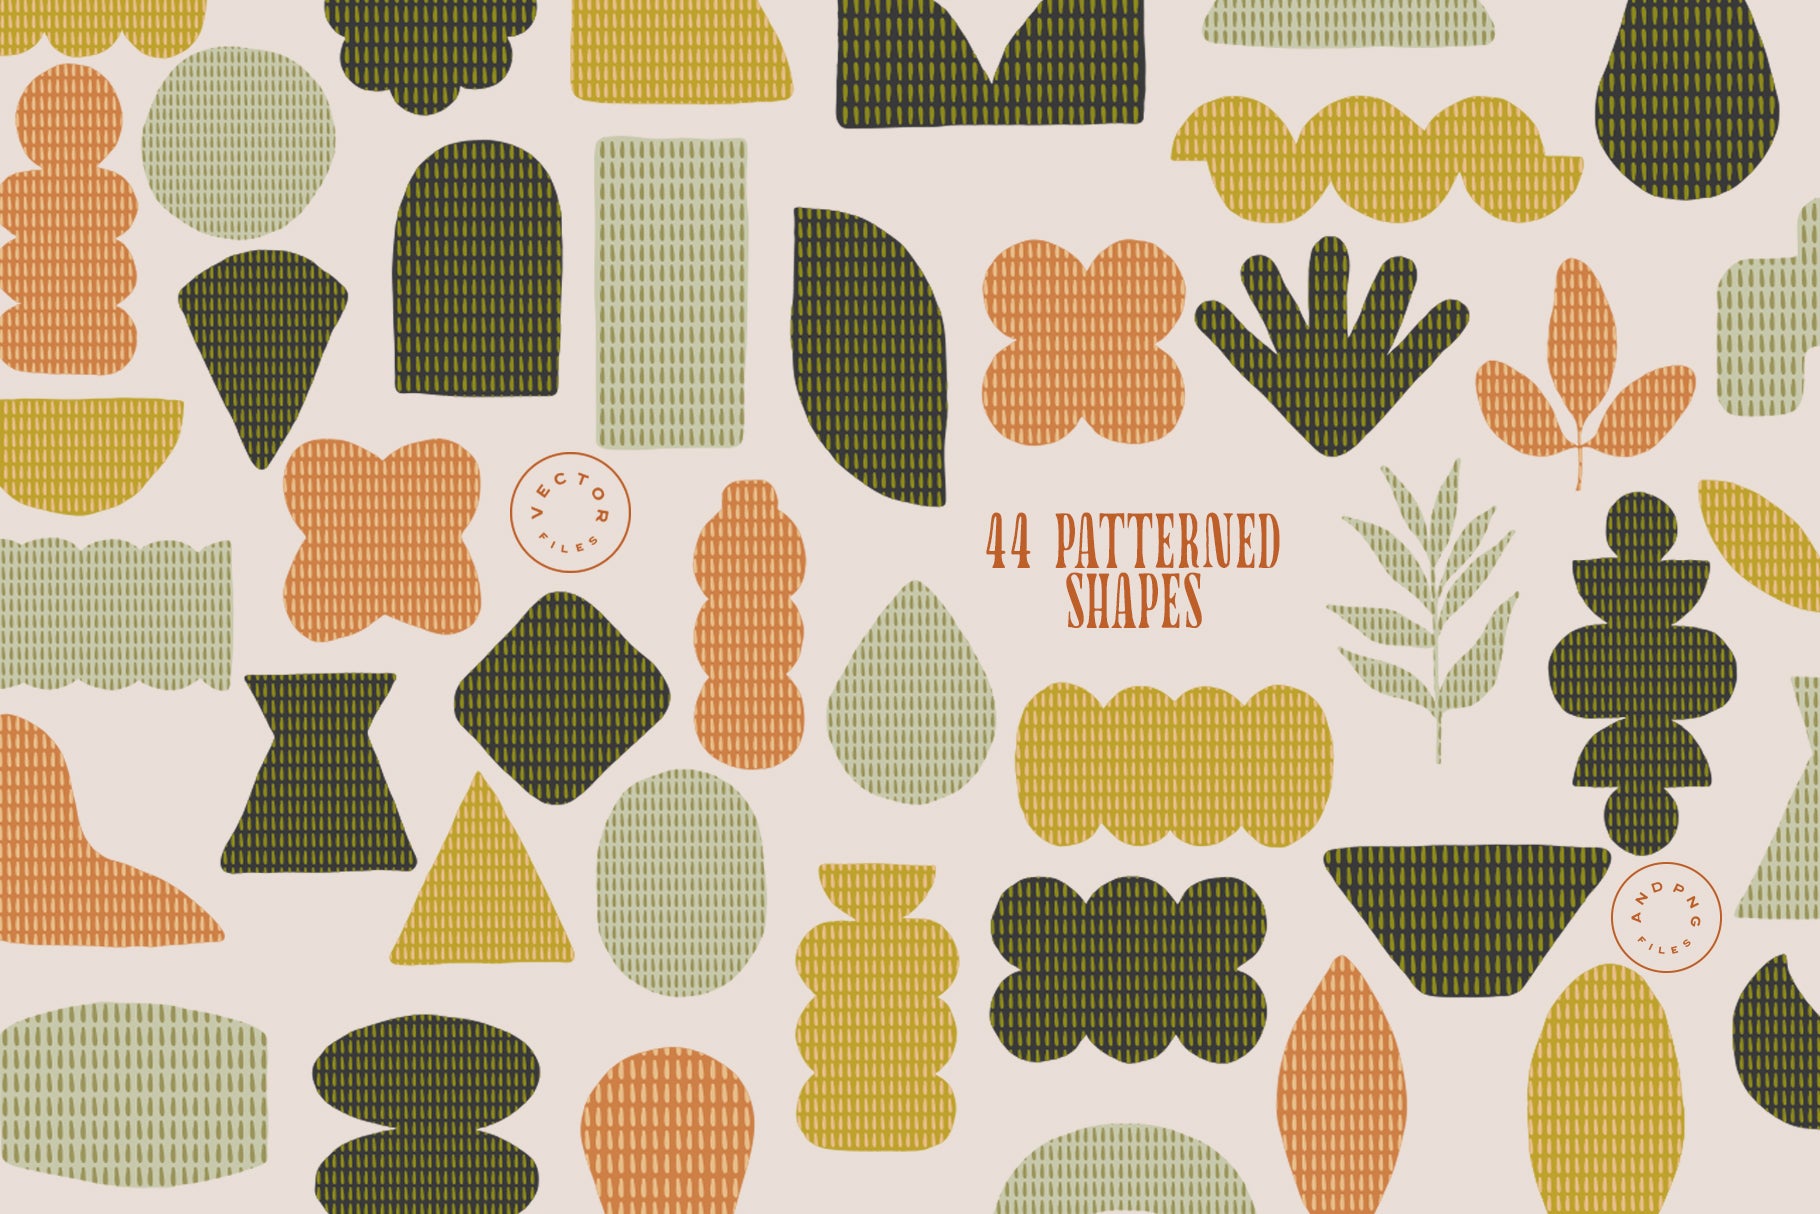 Textured Shapes, Posters &amp; Patterns